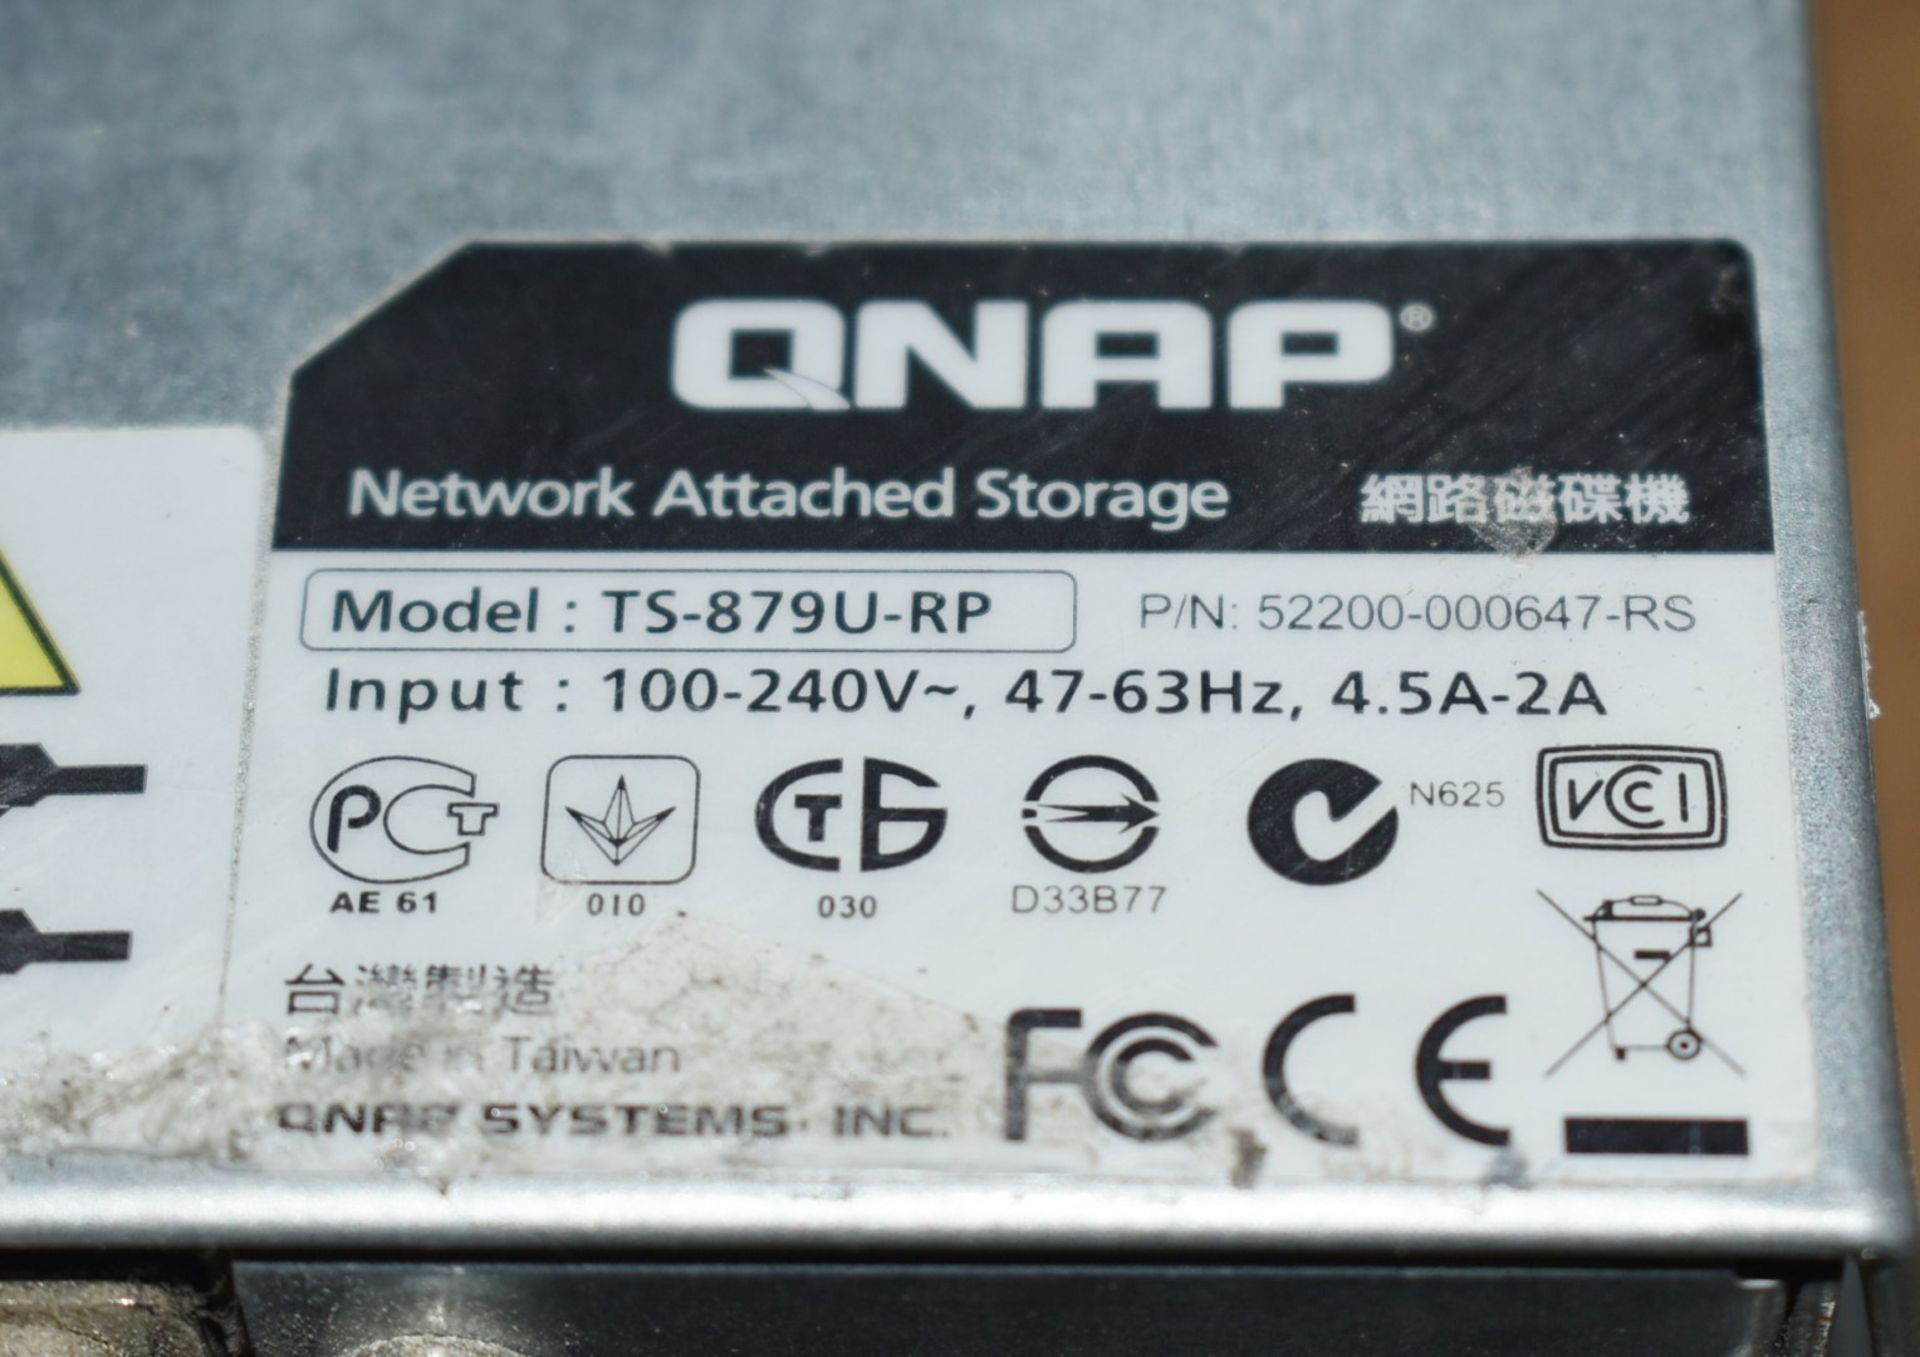 1 x QNAP Network Attached Storage Unit - Model TS-879U-RP - Includes 3 x Ironwolf 10tb Hard Drives - Image 6 of 11